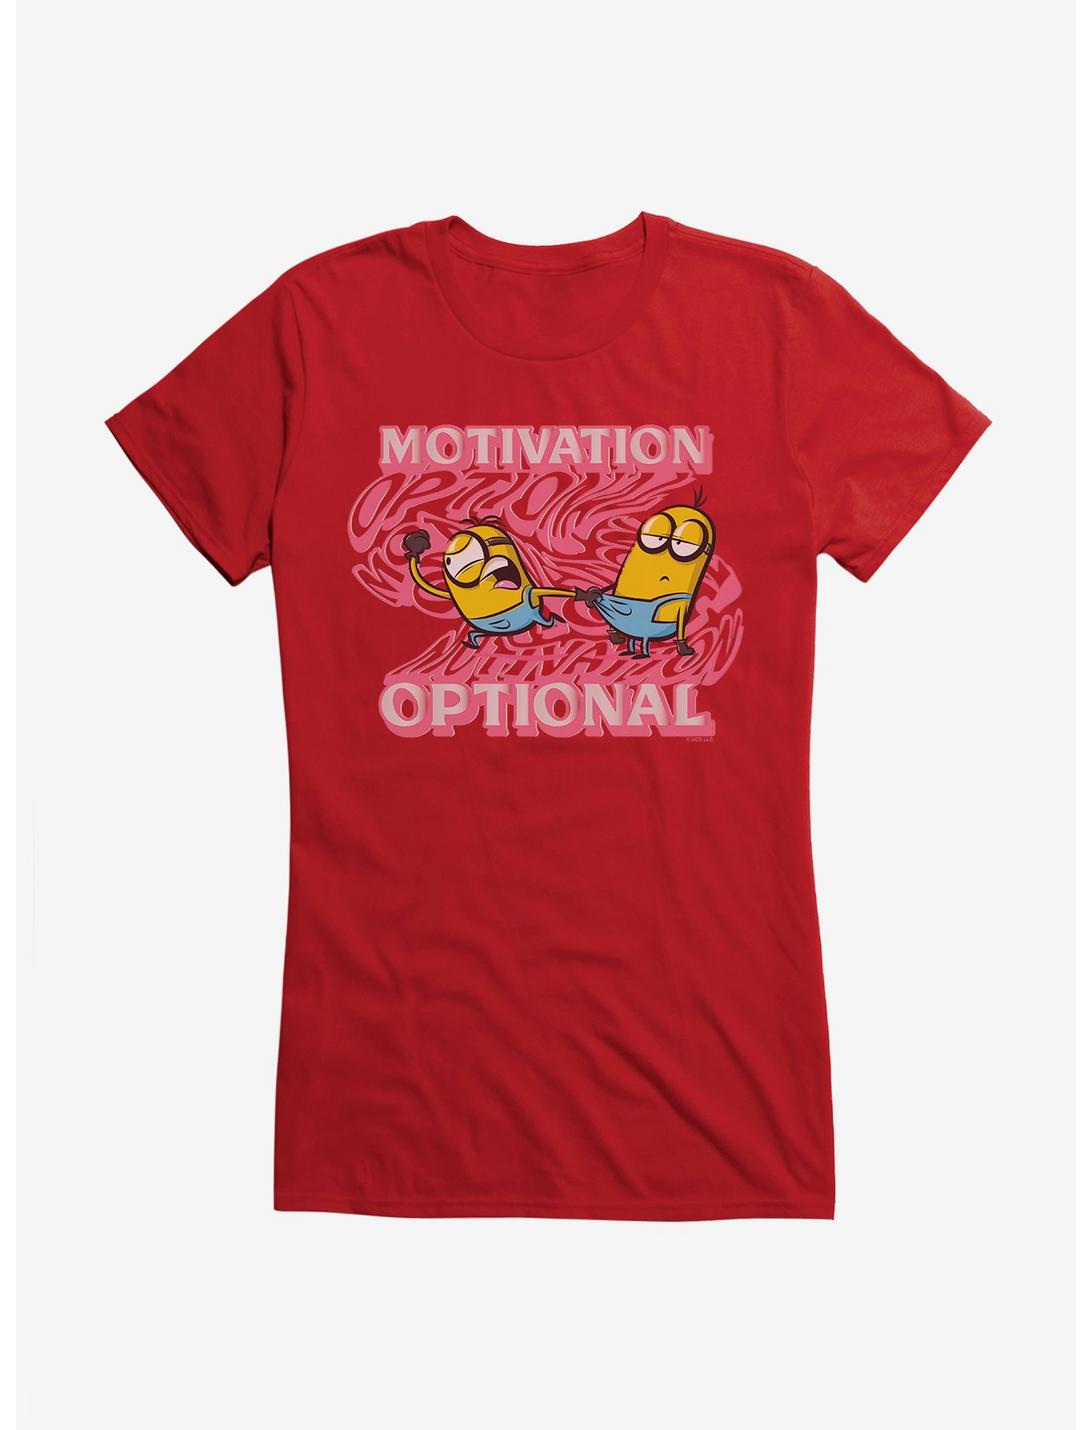 Minions Groovy Motivation Optional Girls T-Shirt, RED, hi-res